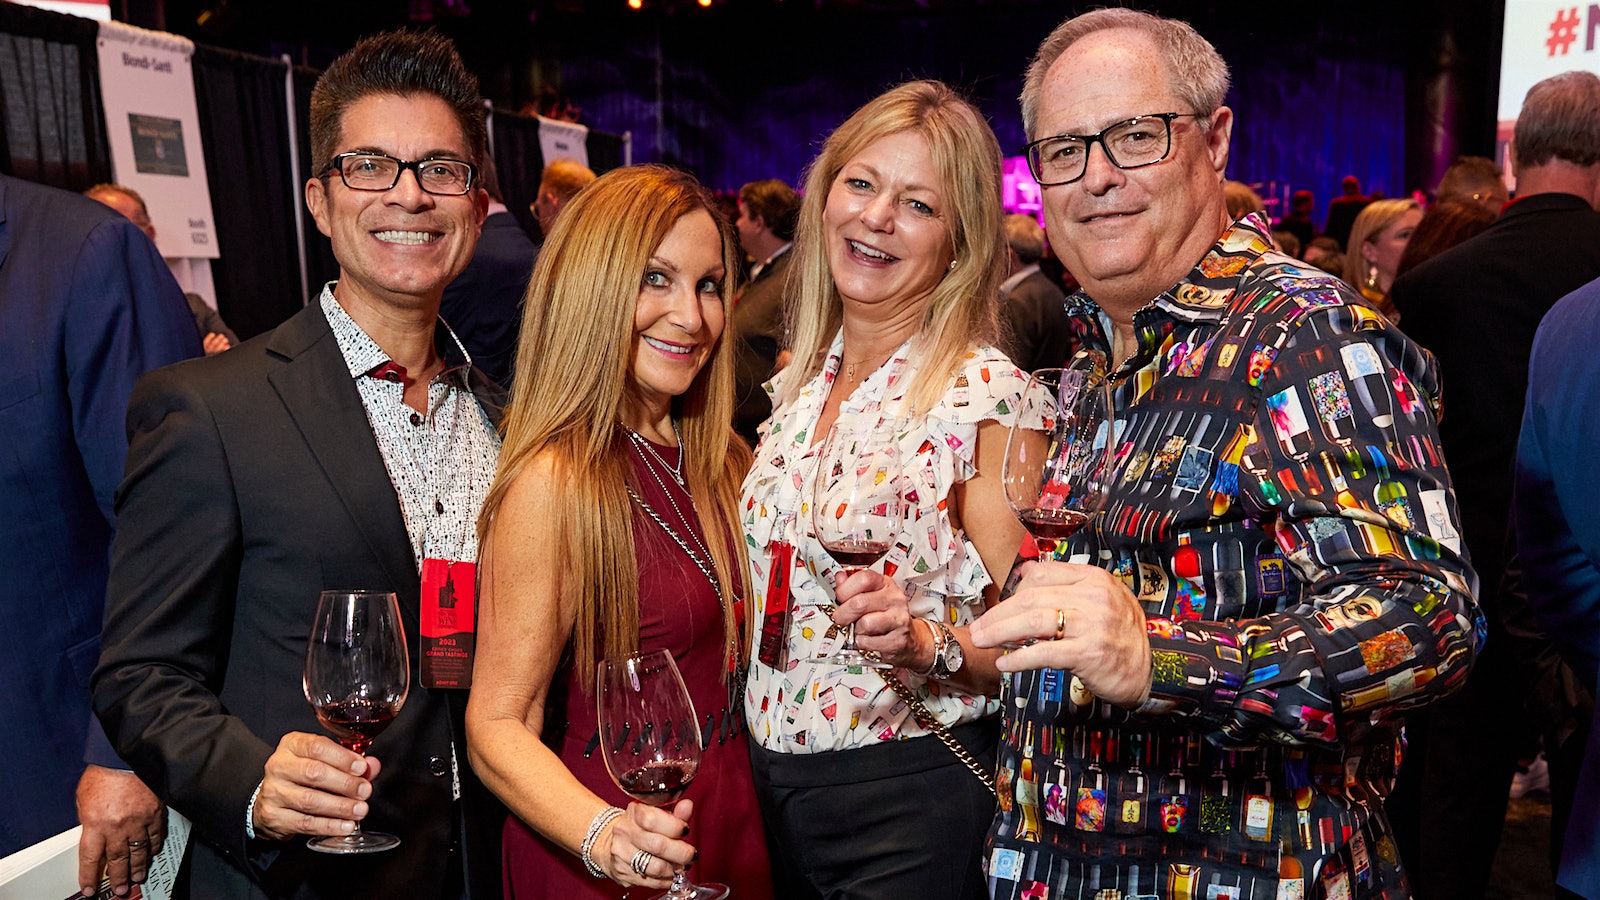  Two women and two men, with three in the group wearing wine-themed shirts, attending the Wine Spectator Grand Tasting together